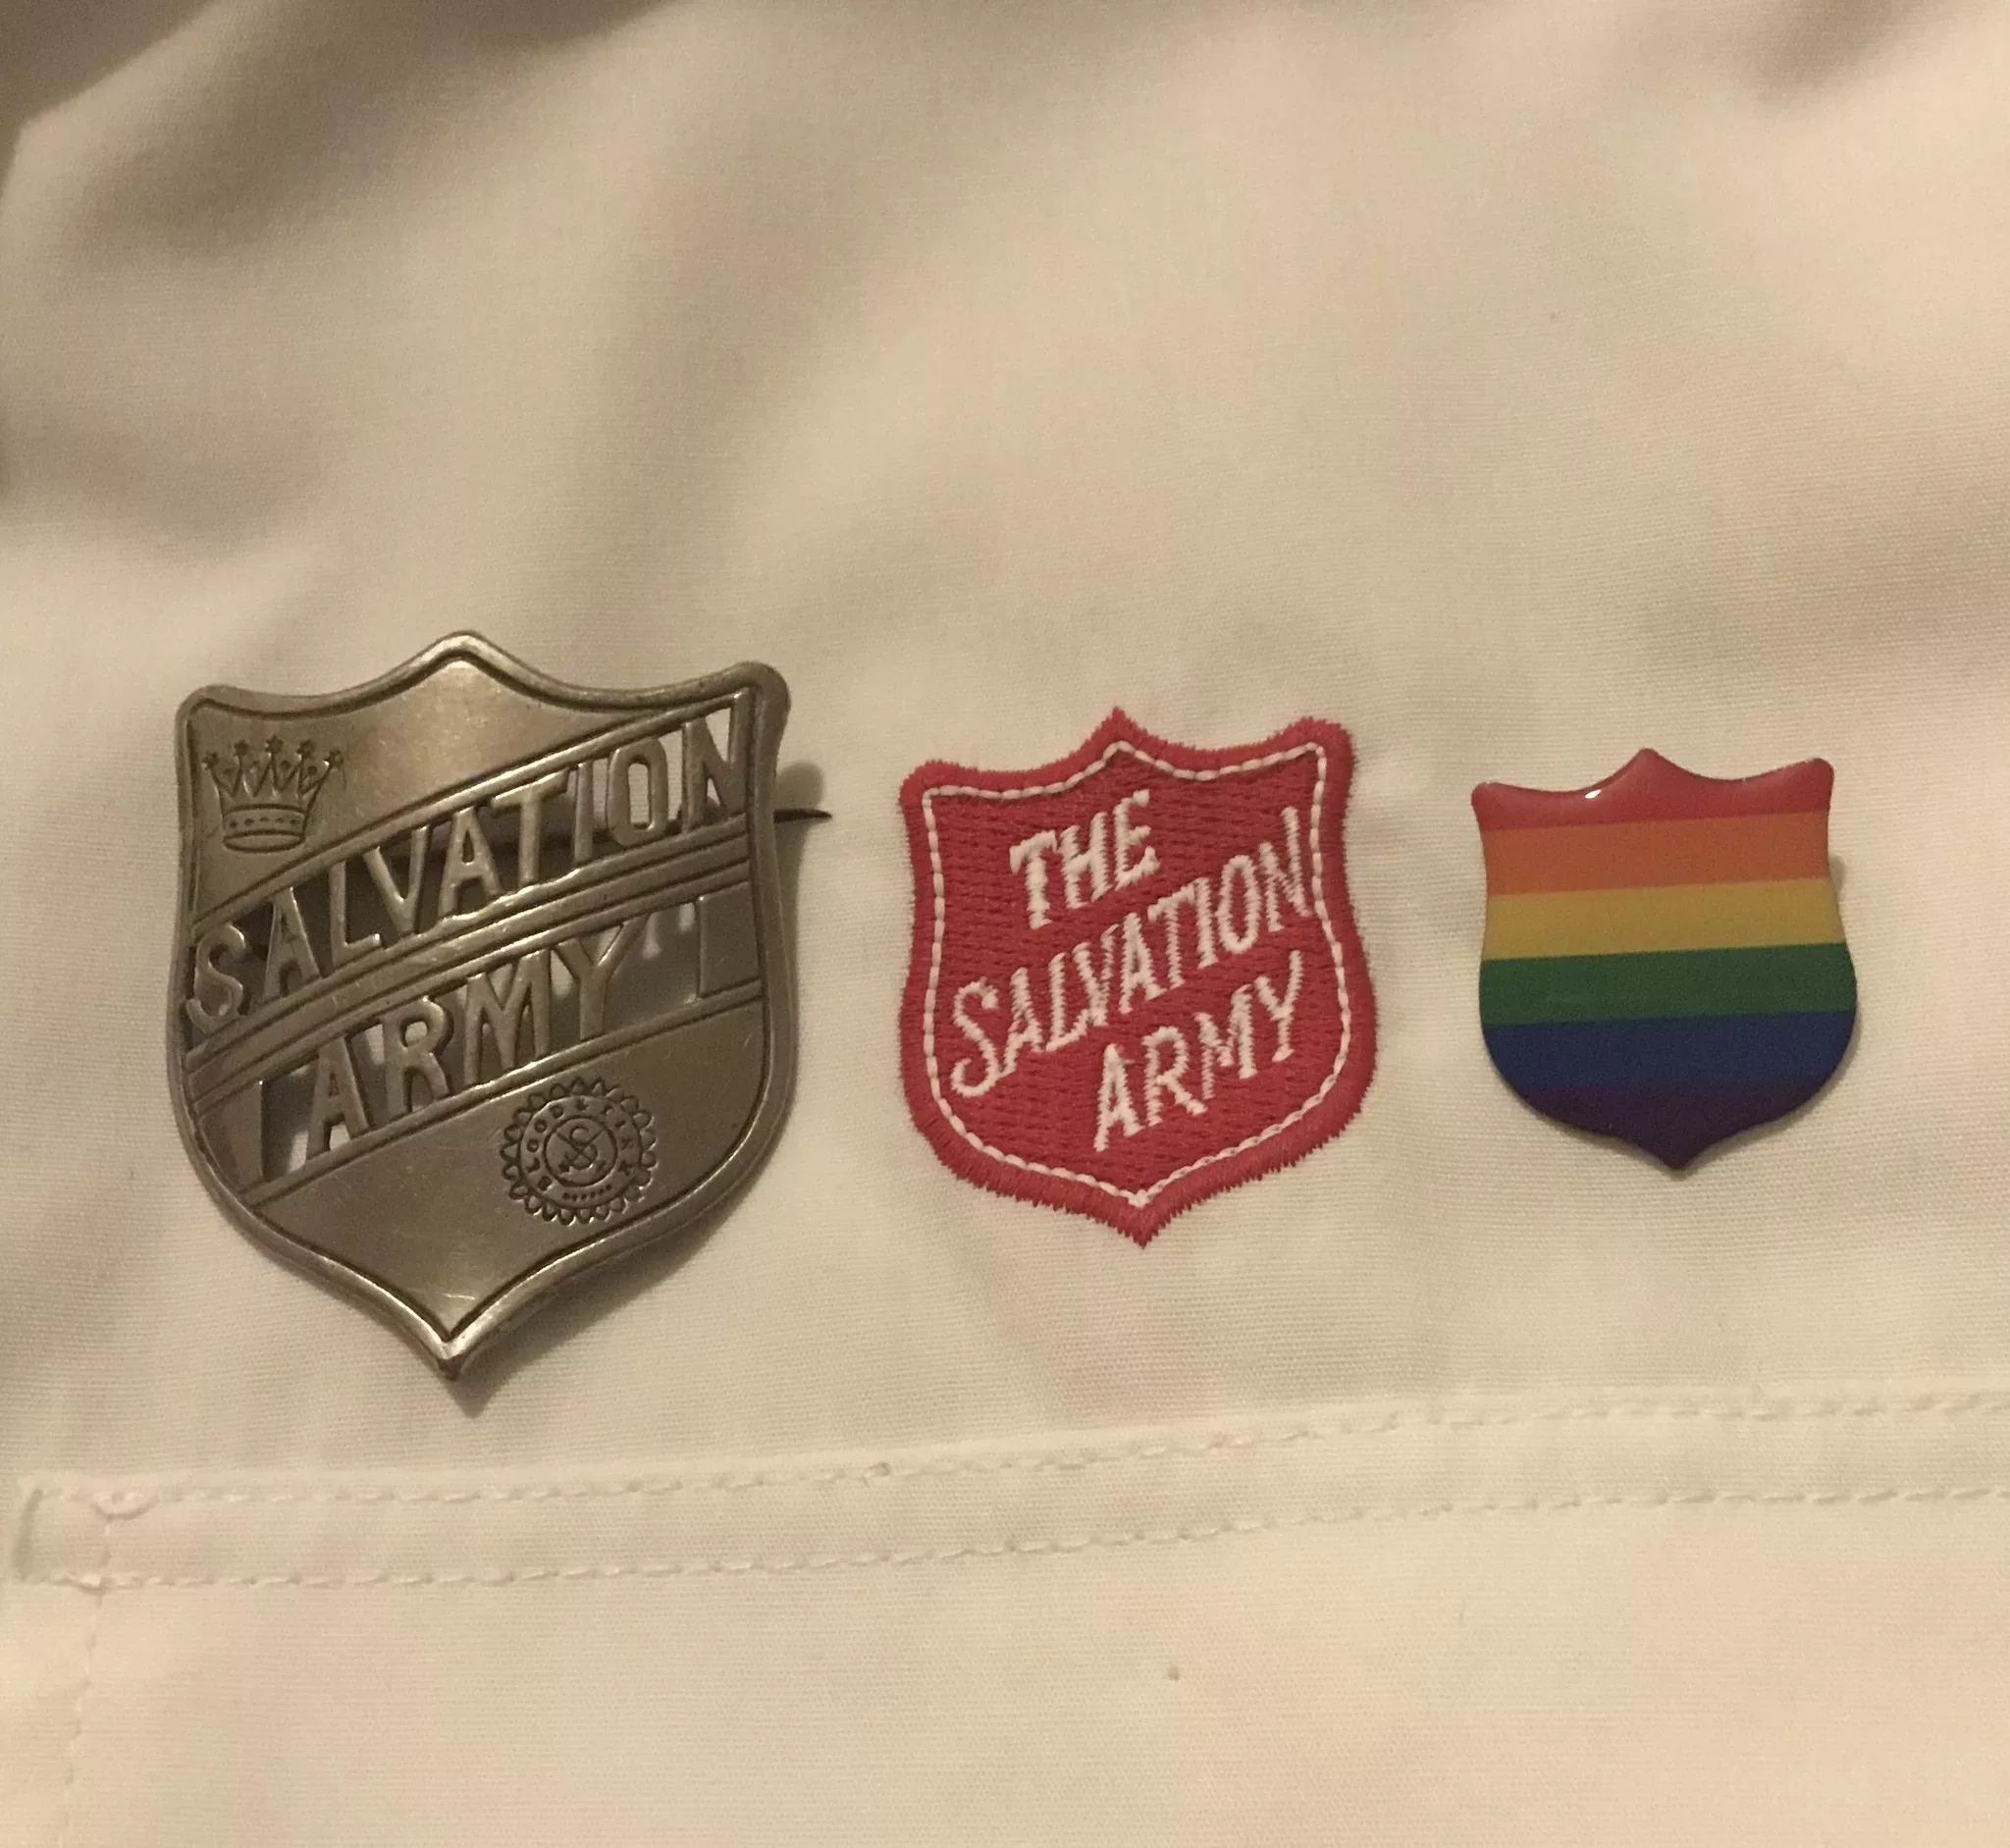 LGBTQ part 9 – The Salvation Army